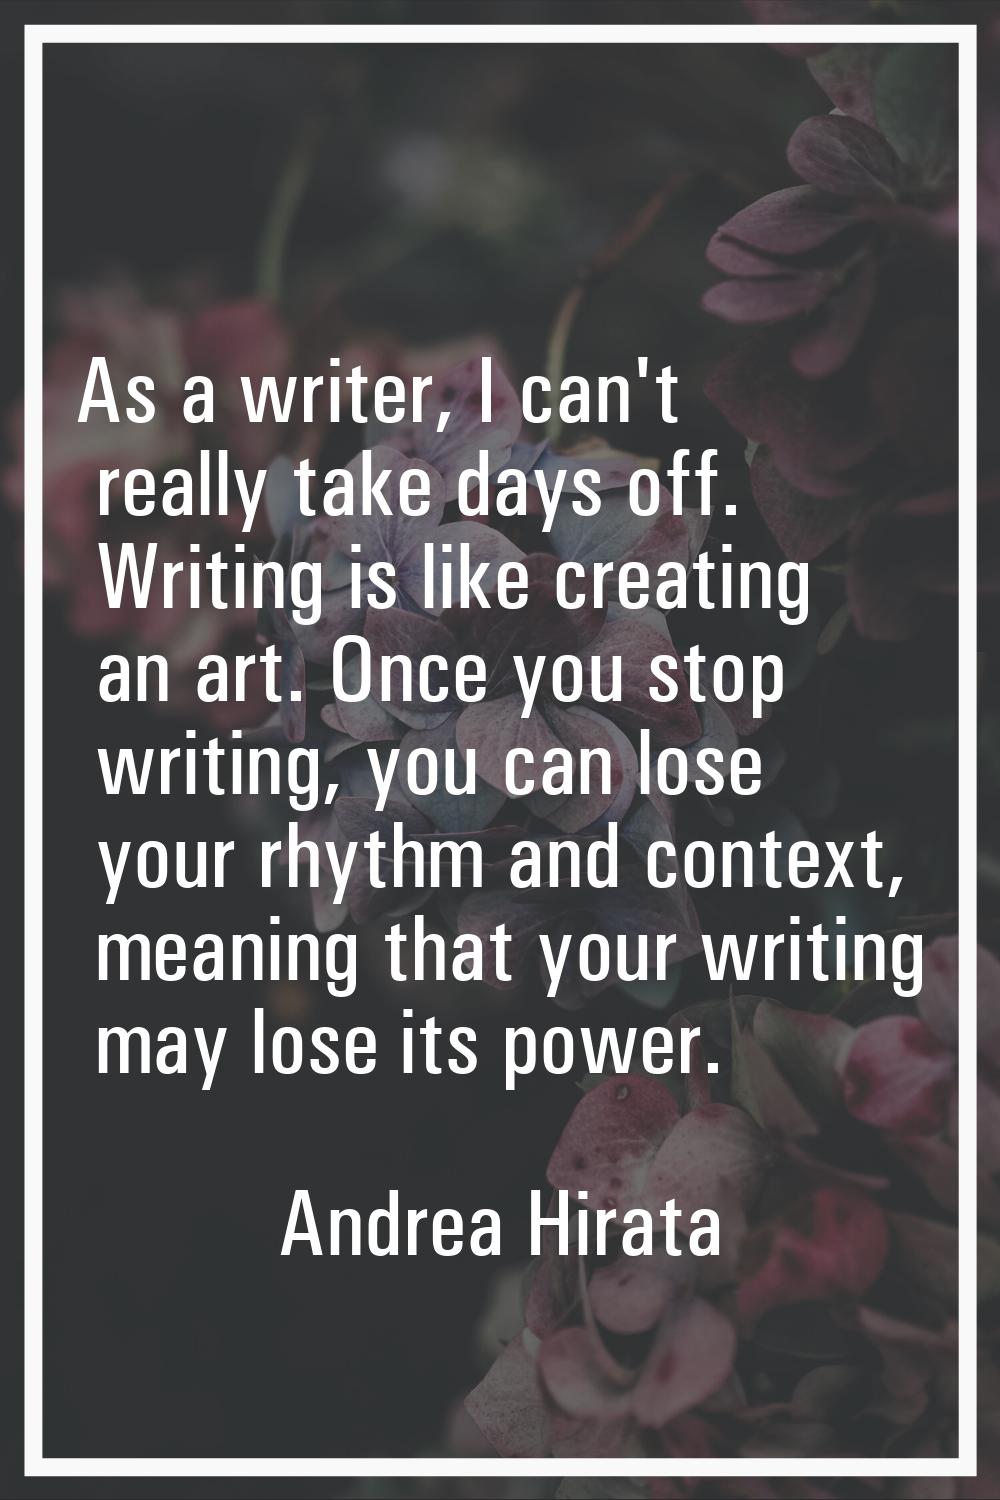 As a writer, I can't really take days off. Writing is like creating an art. Once you stop writing, 